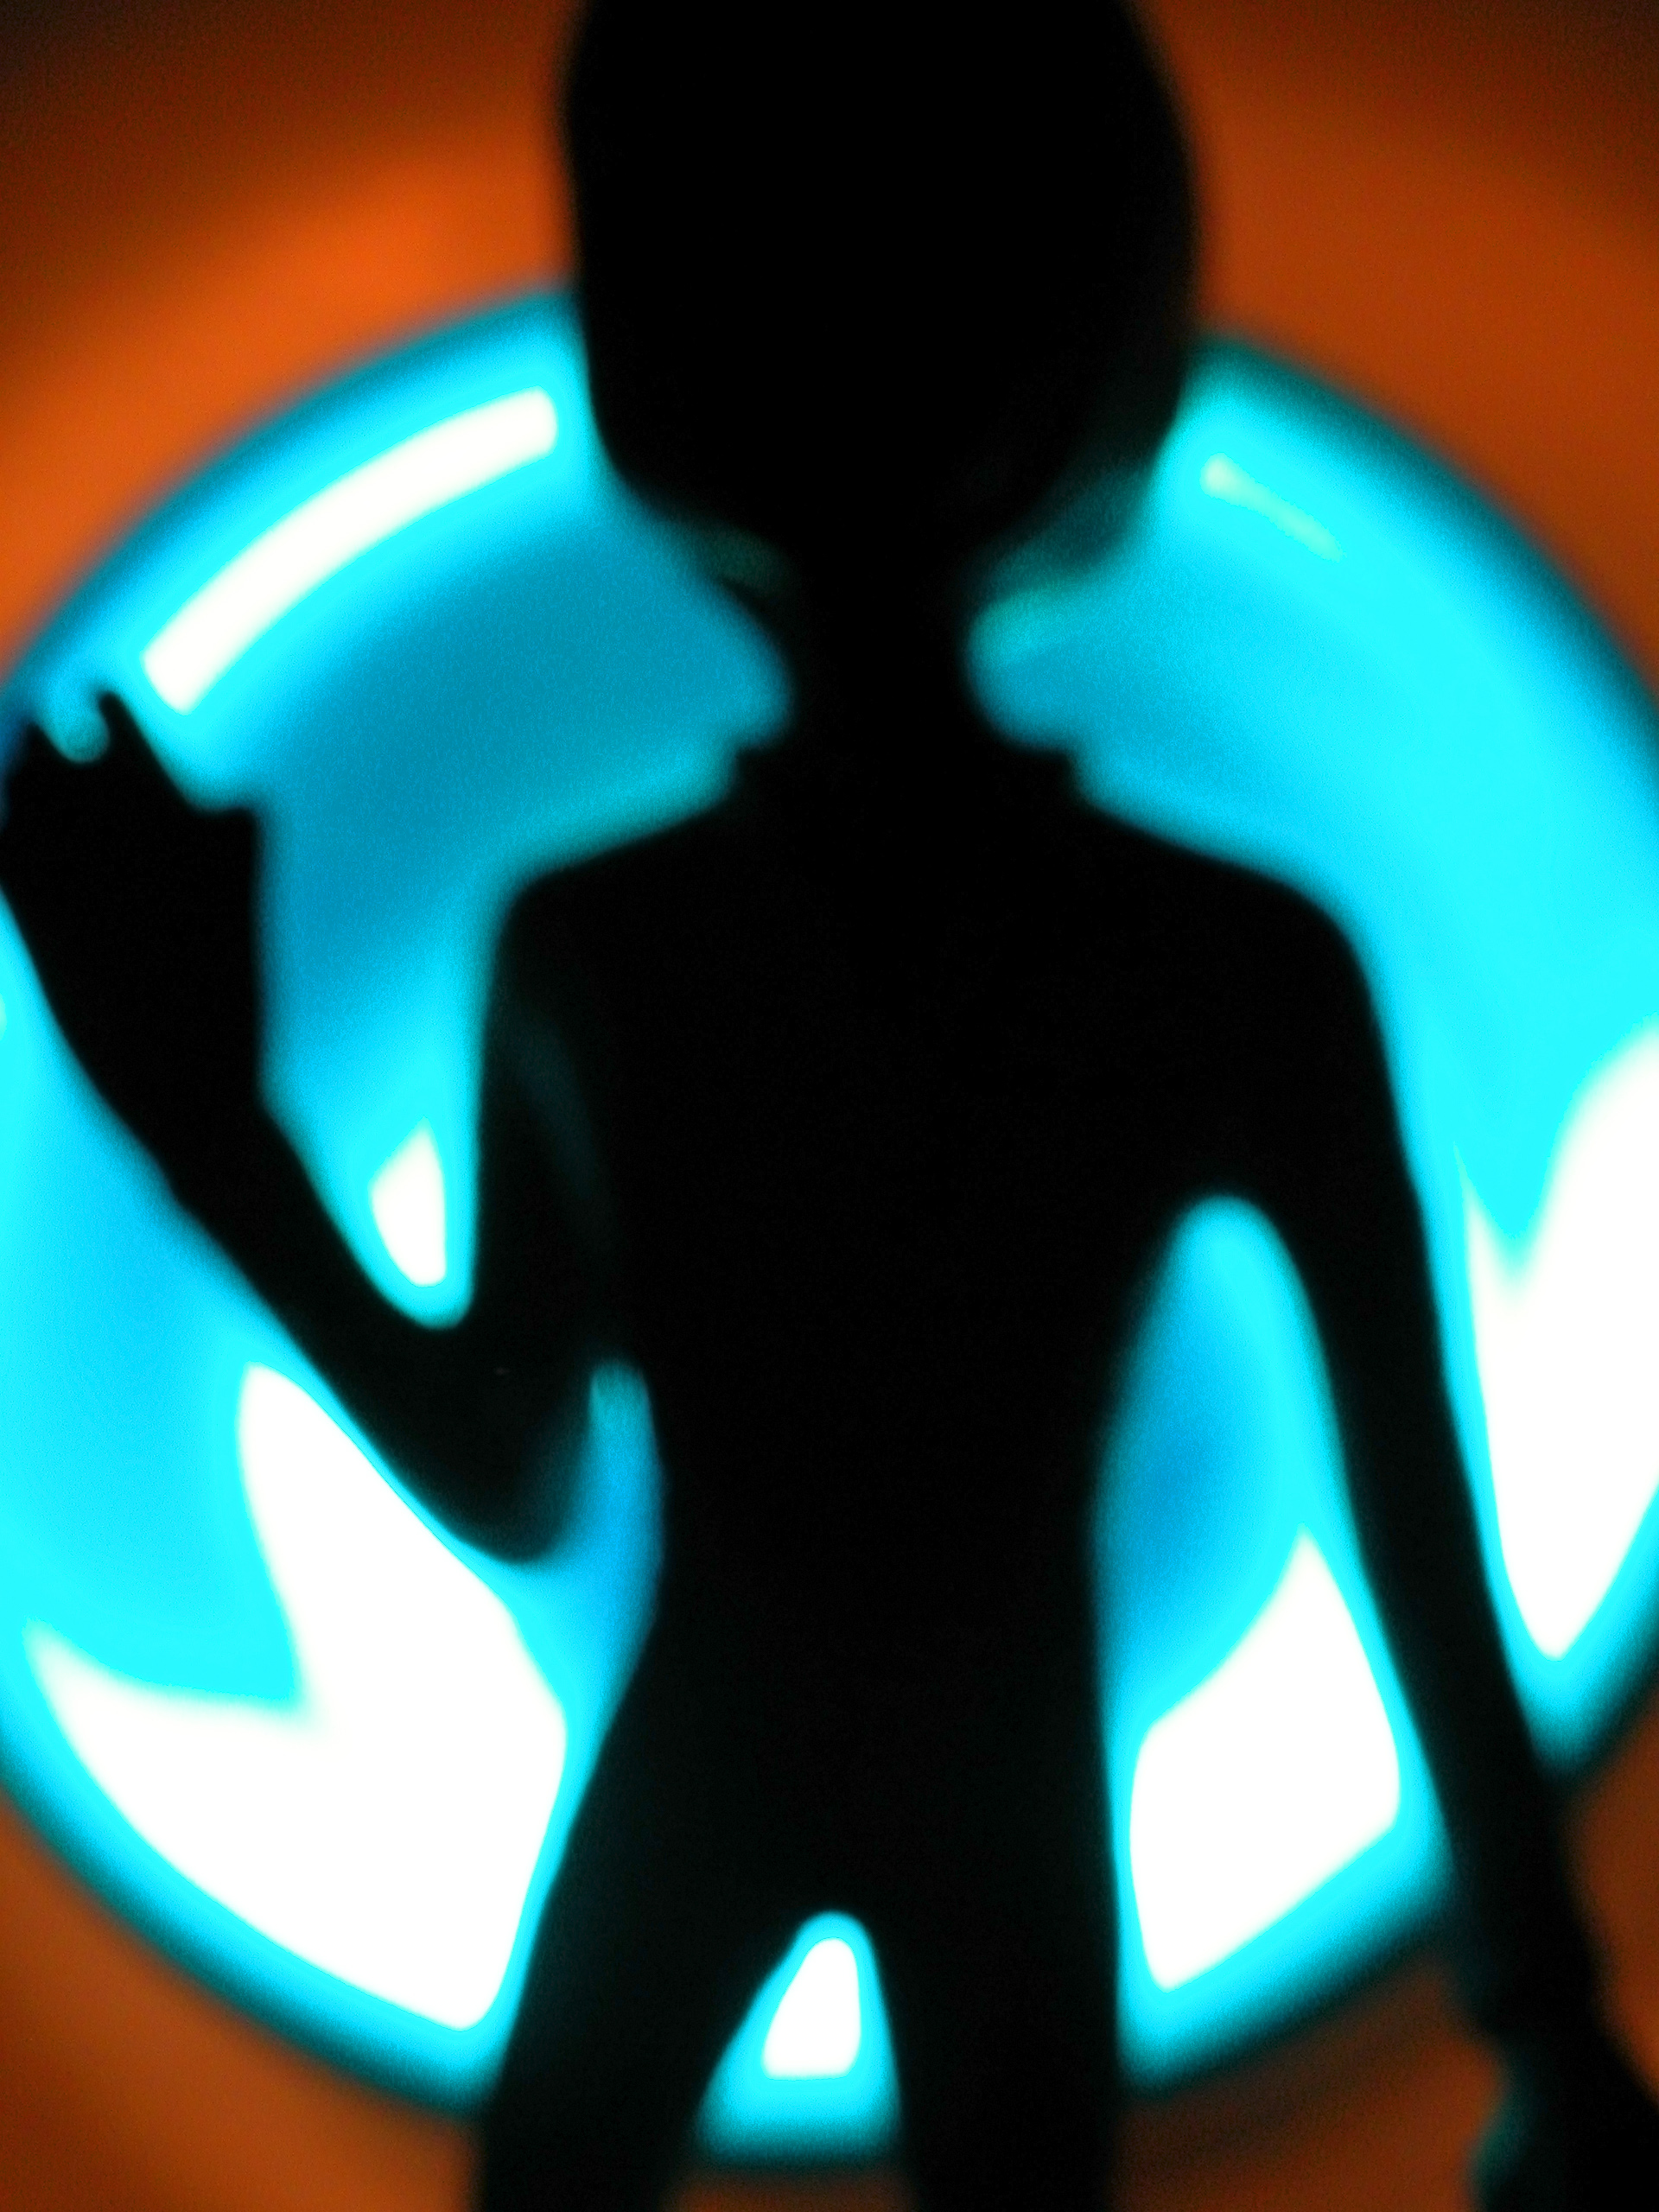 Image Description: The shadow of a being that seems alien. The background is a round, blue light.